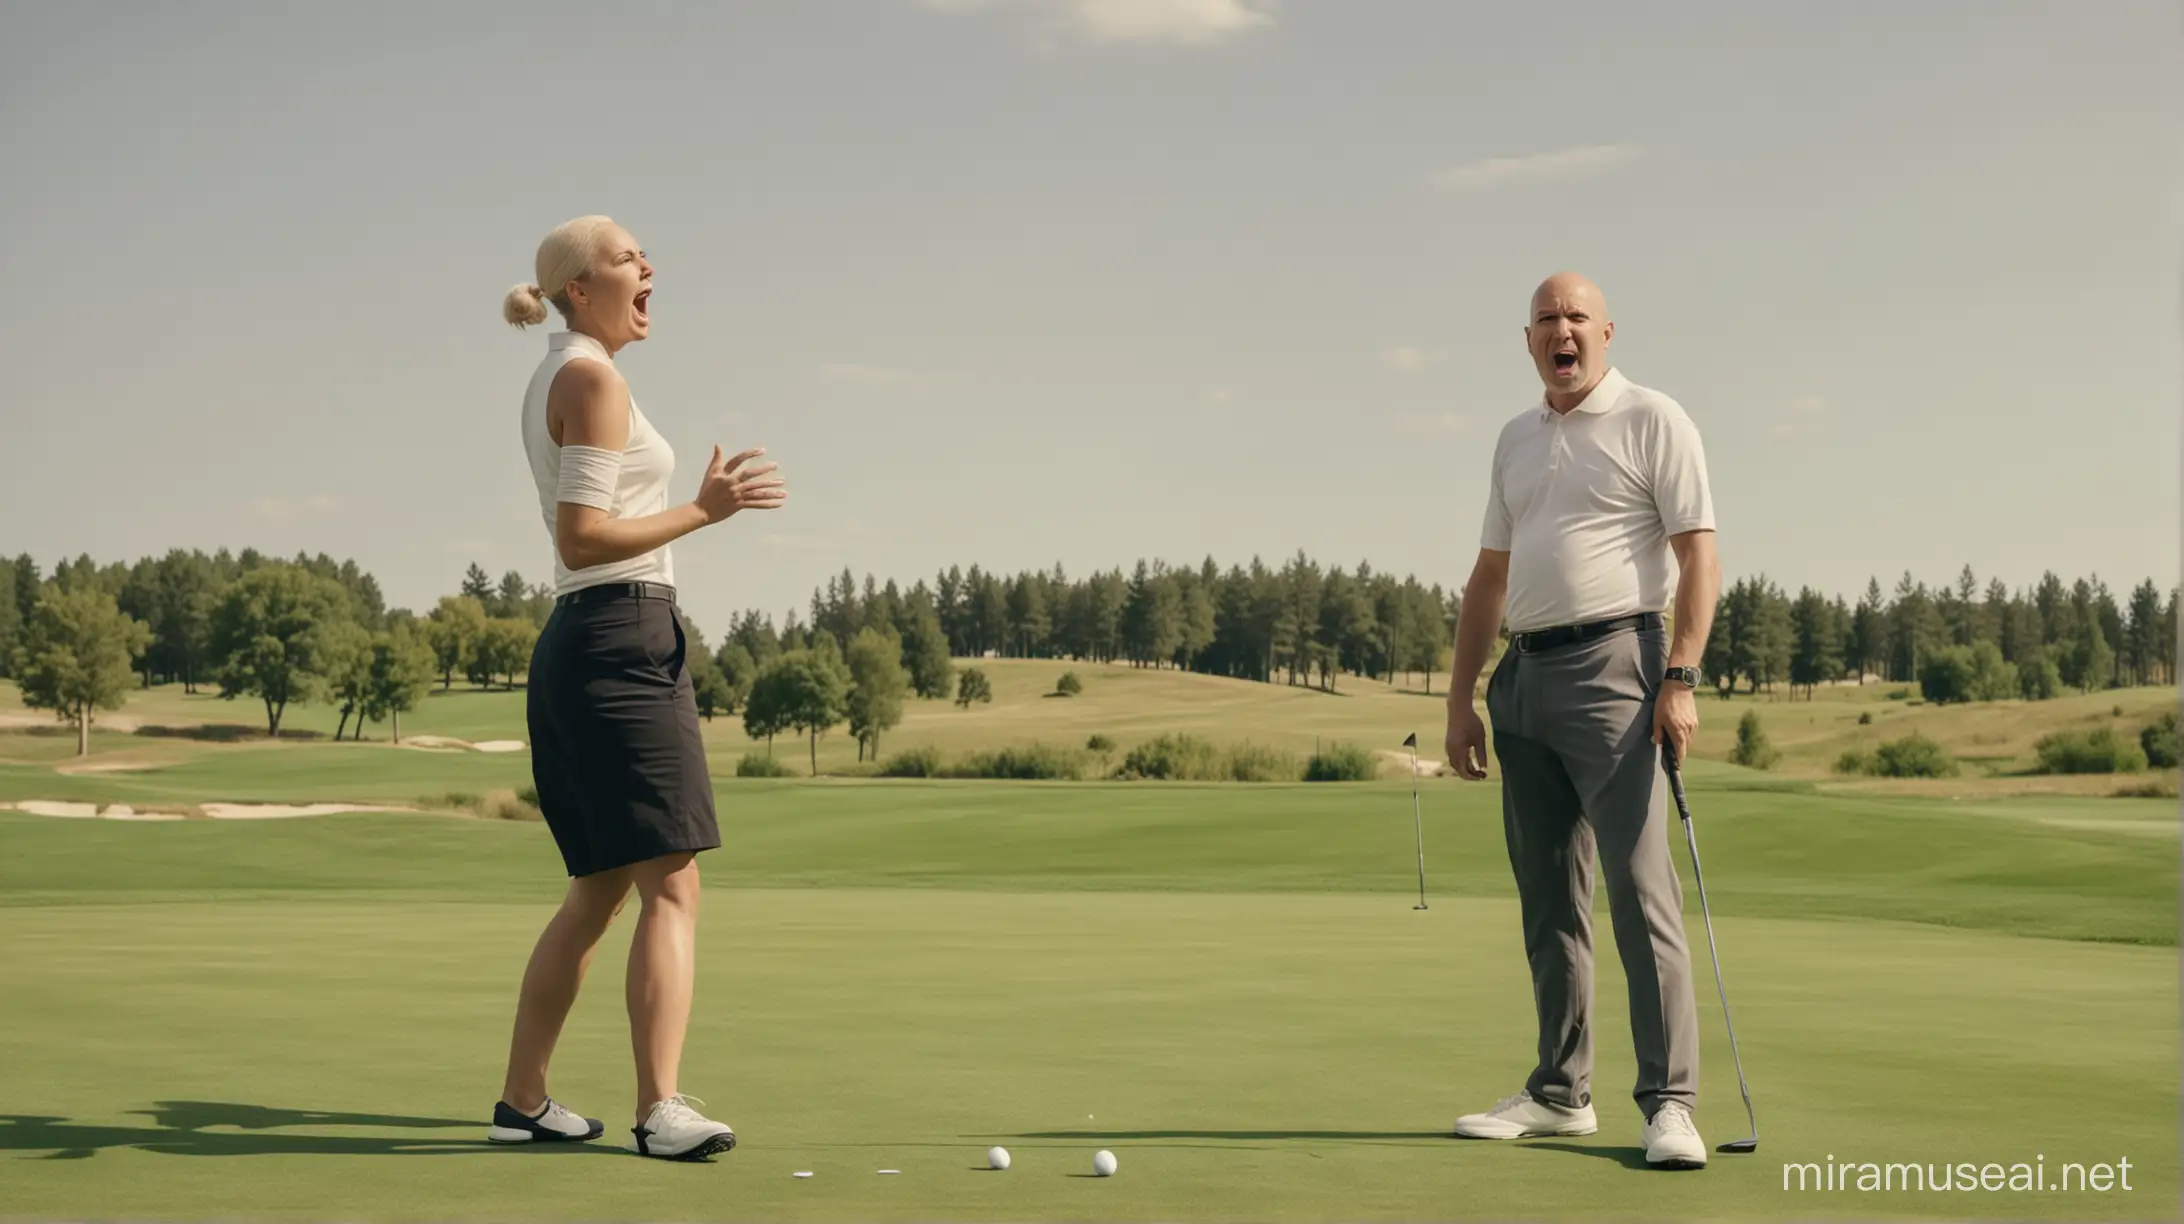 Bald man standing on the golf course and playing golf. Woman watches and shouts something.